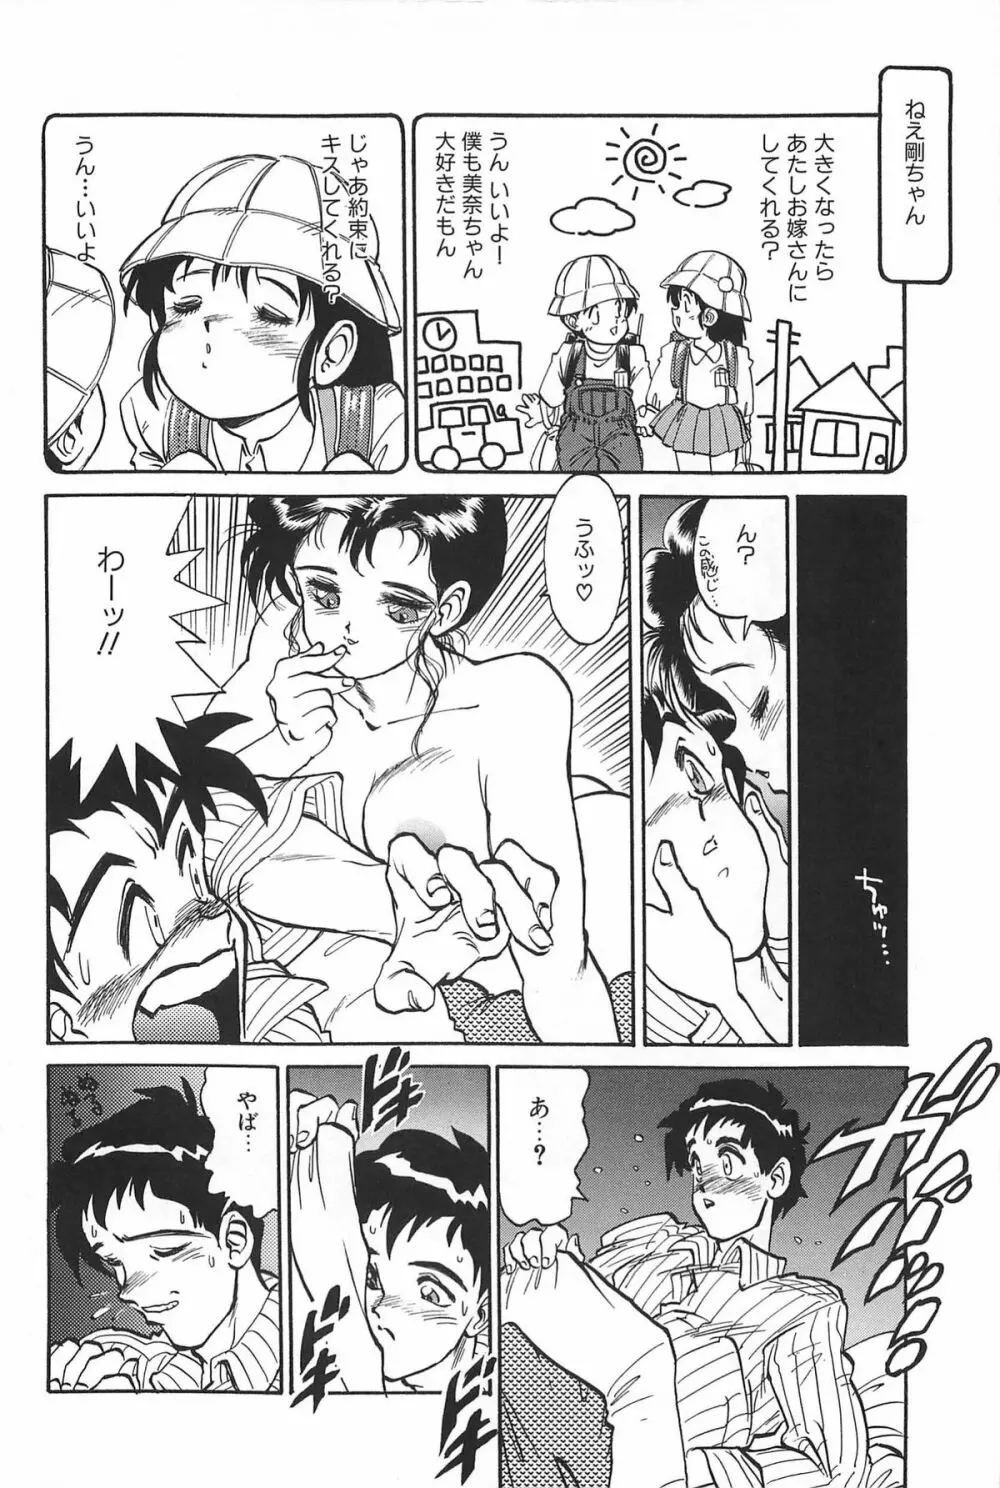 LOVE ME 1995 Page.18